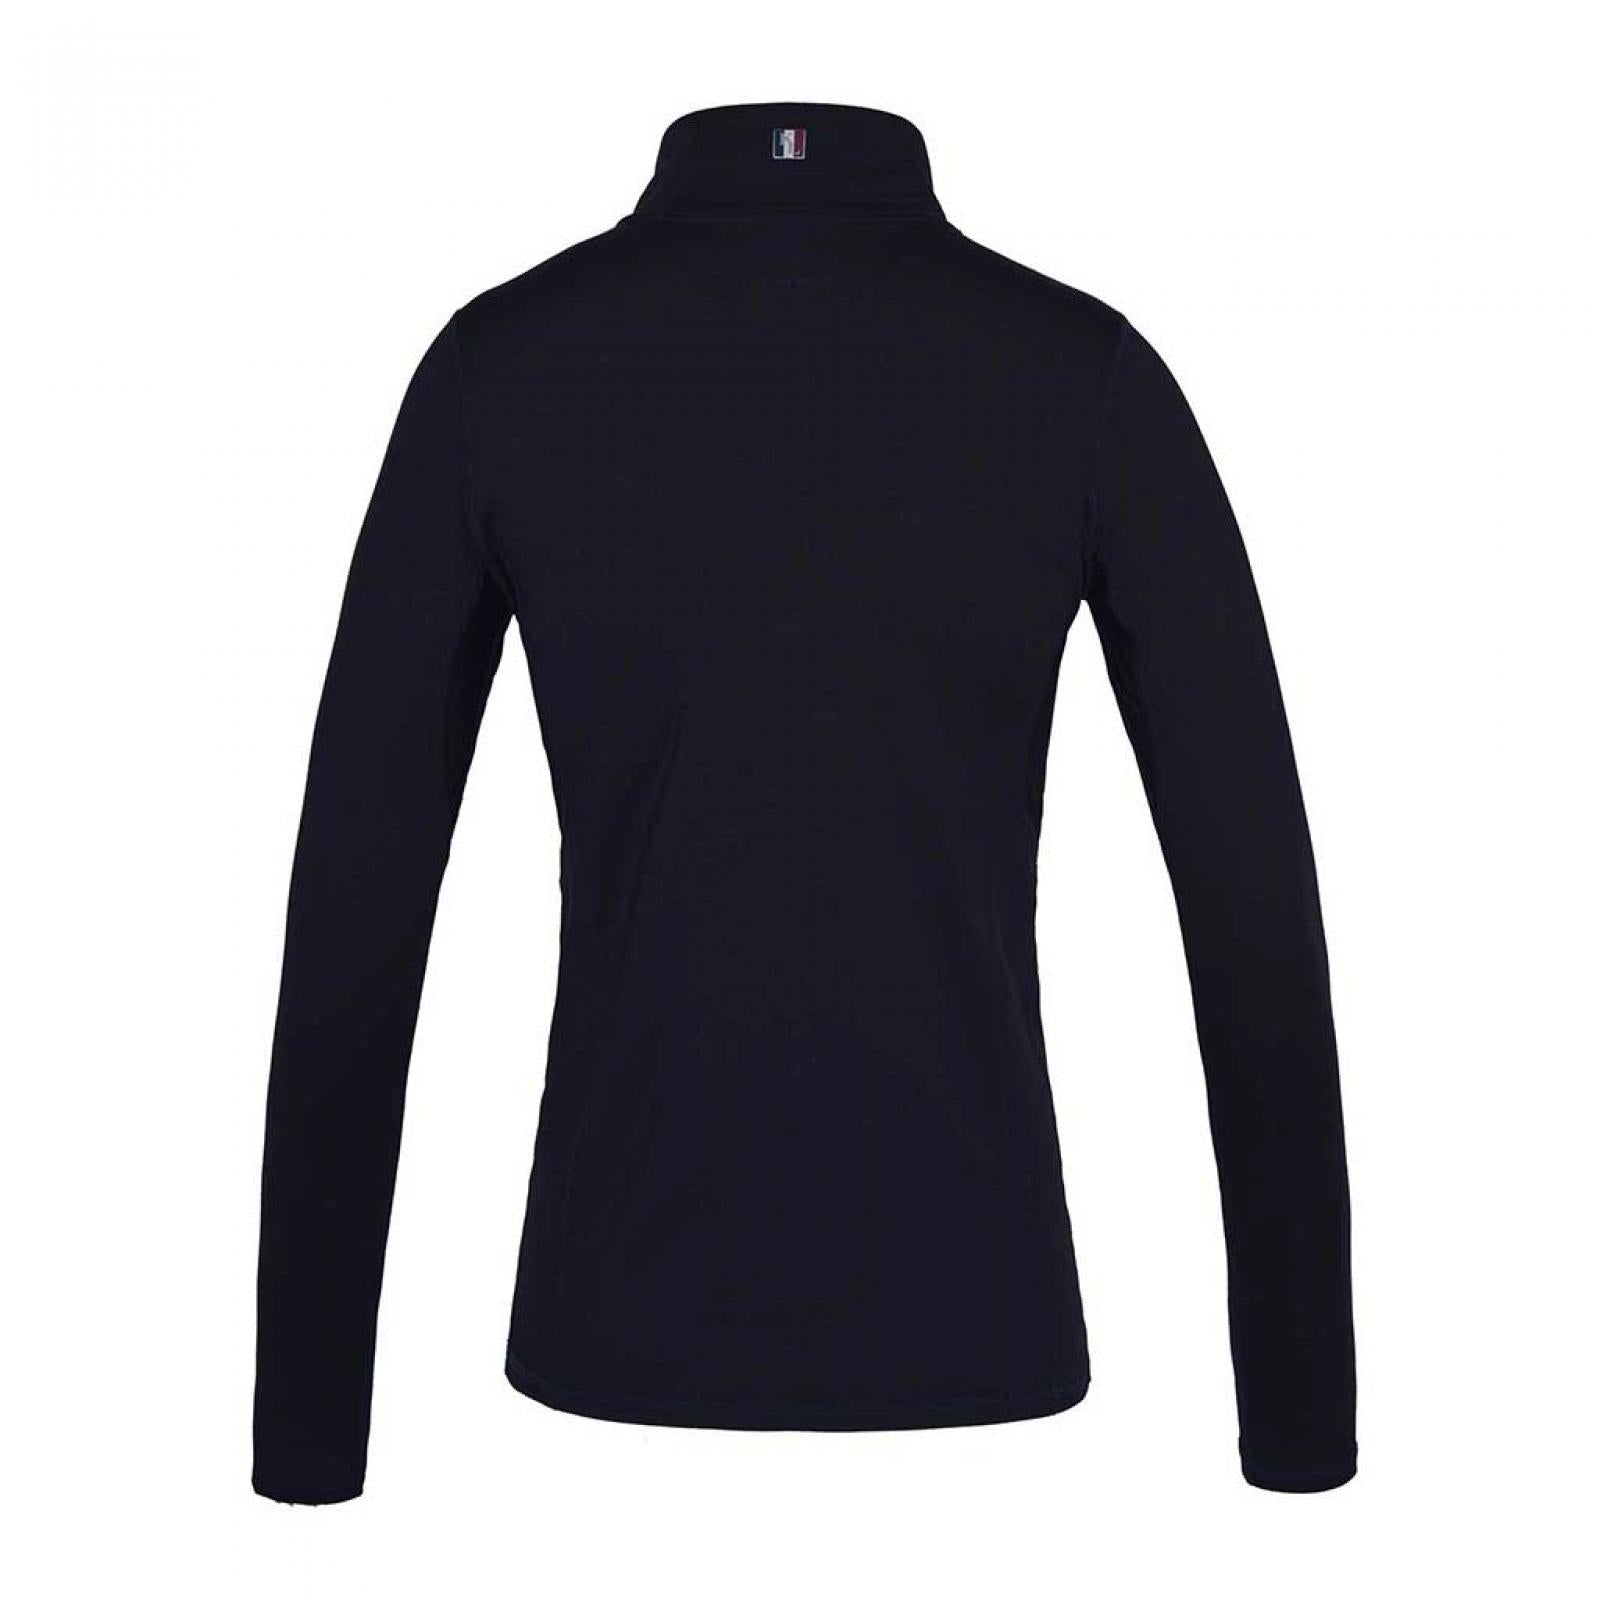 Classic Training Shirt Long Sleeves for Ladies - Navy